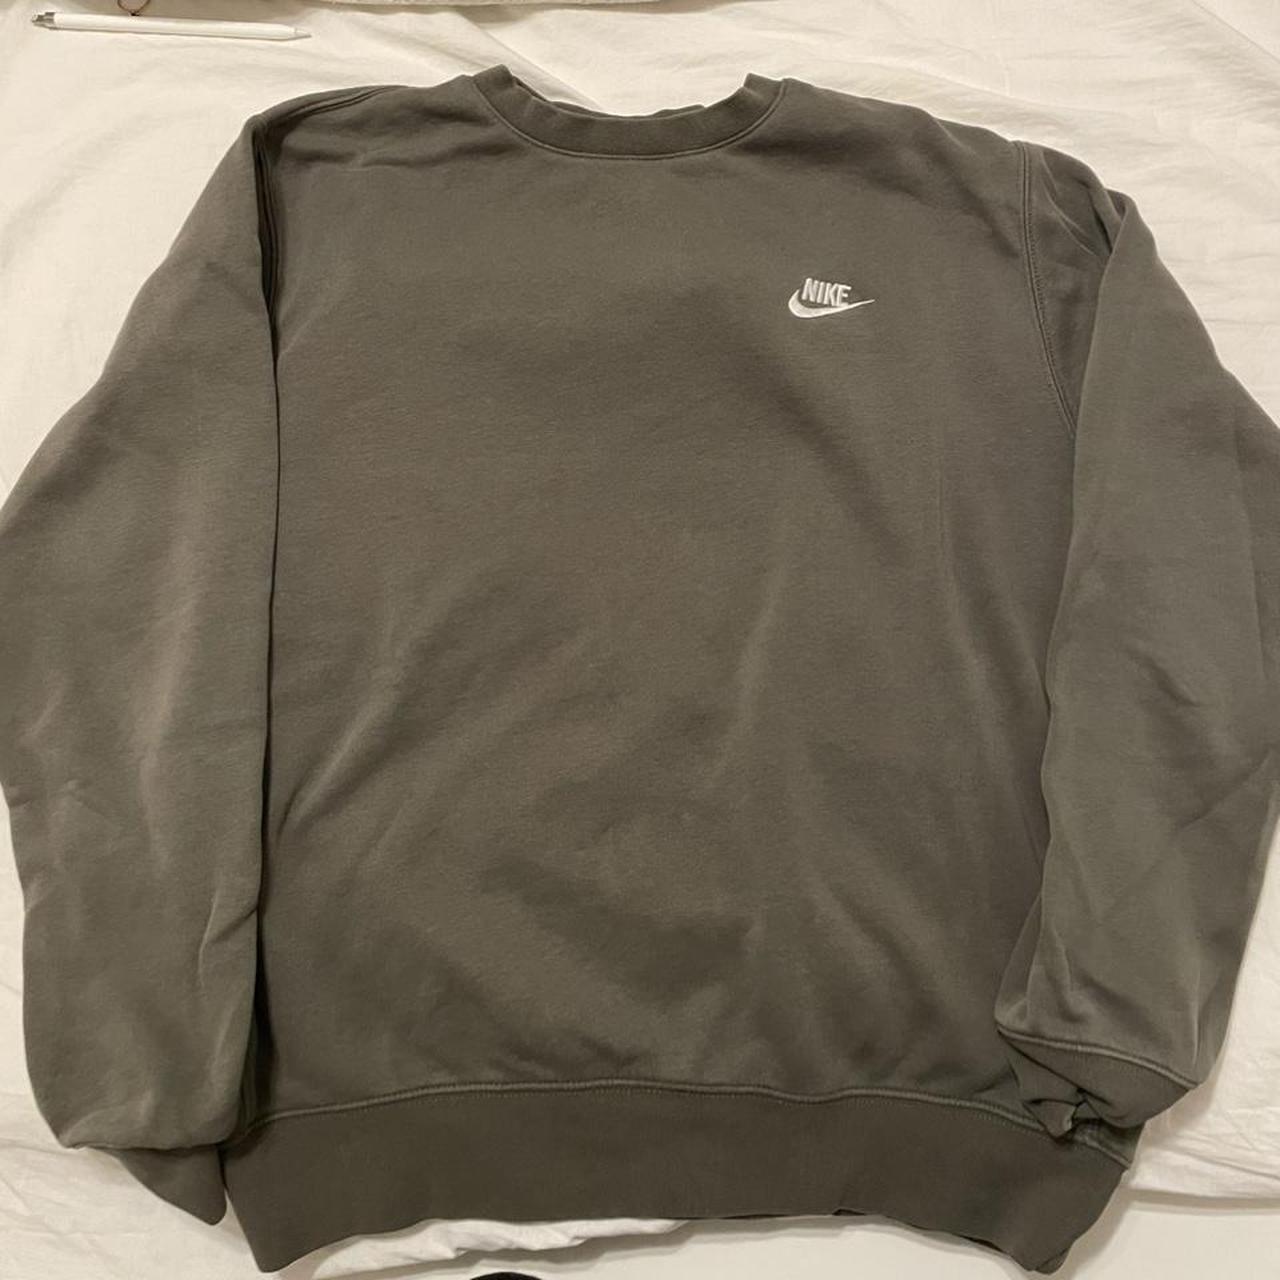 Discontinued Dark green Nike sweater! willing to... - Depop